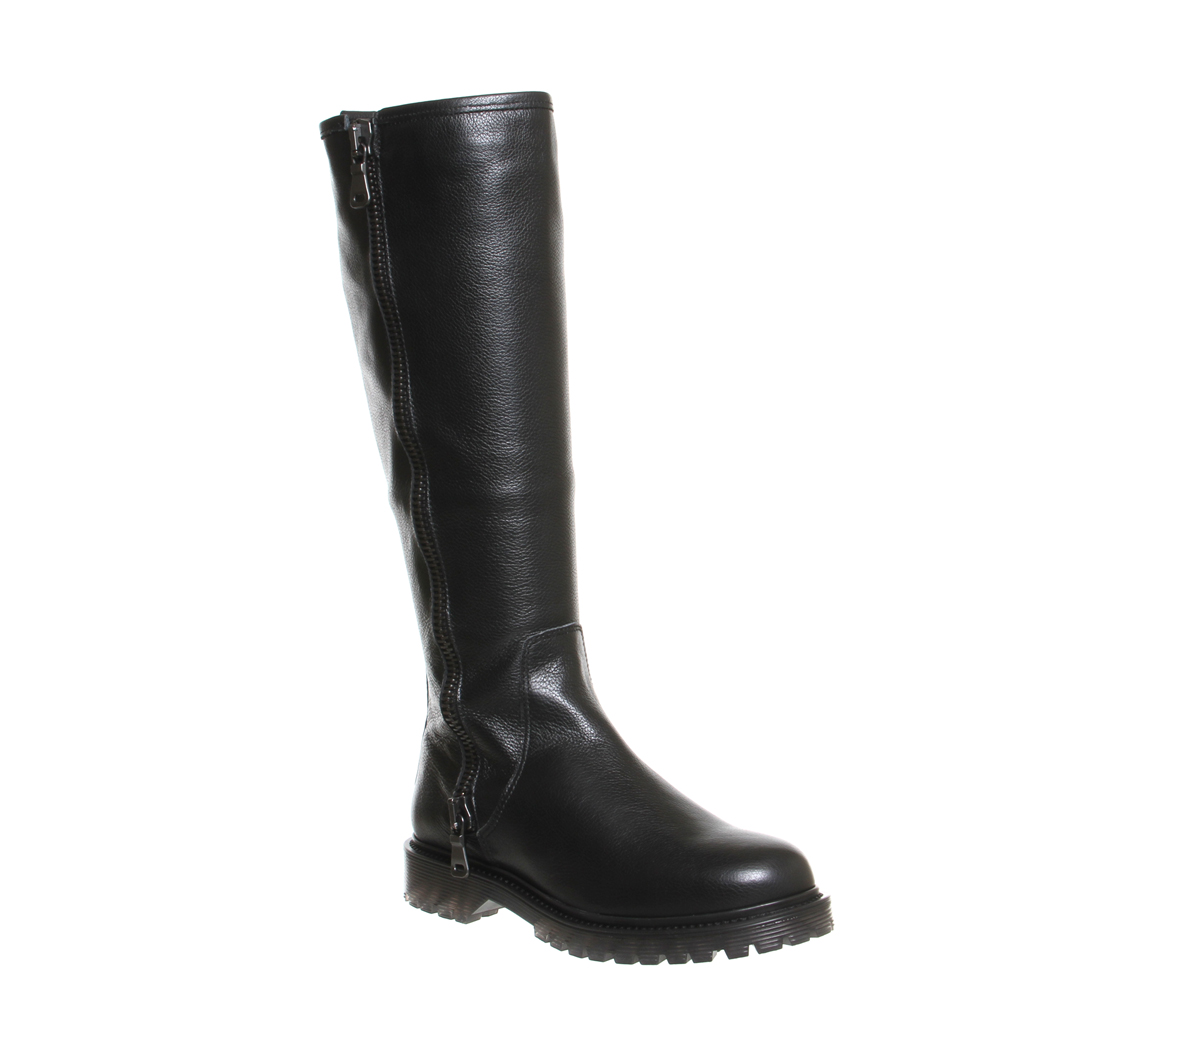 OFFICENell Side Zip Knee bootsBlack Leather